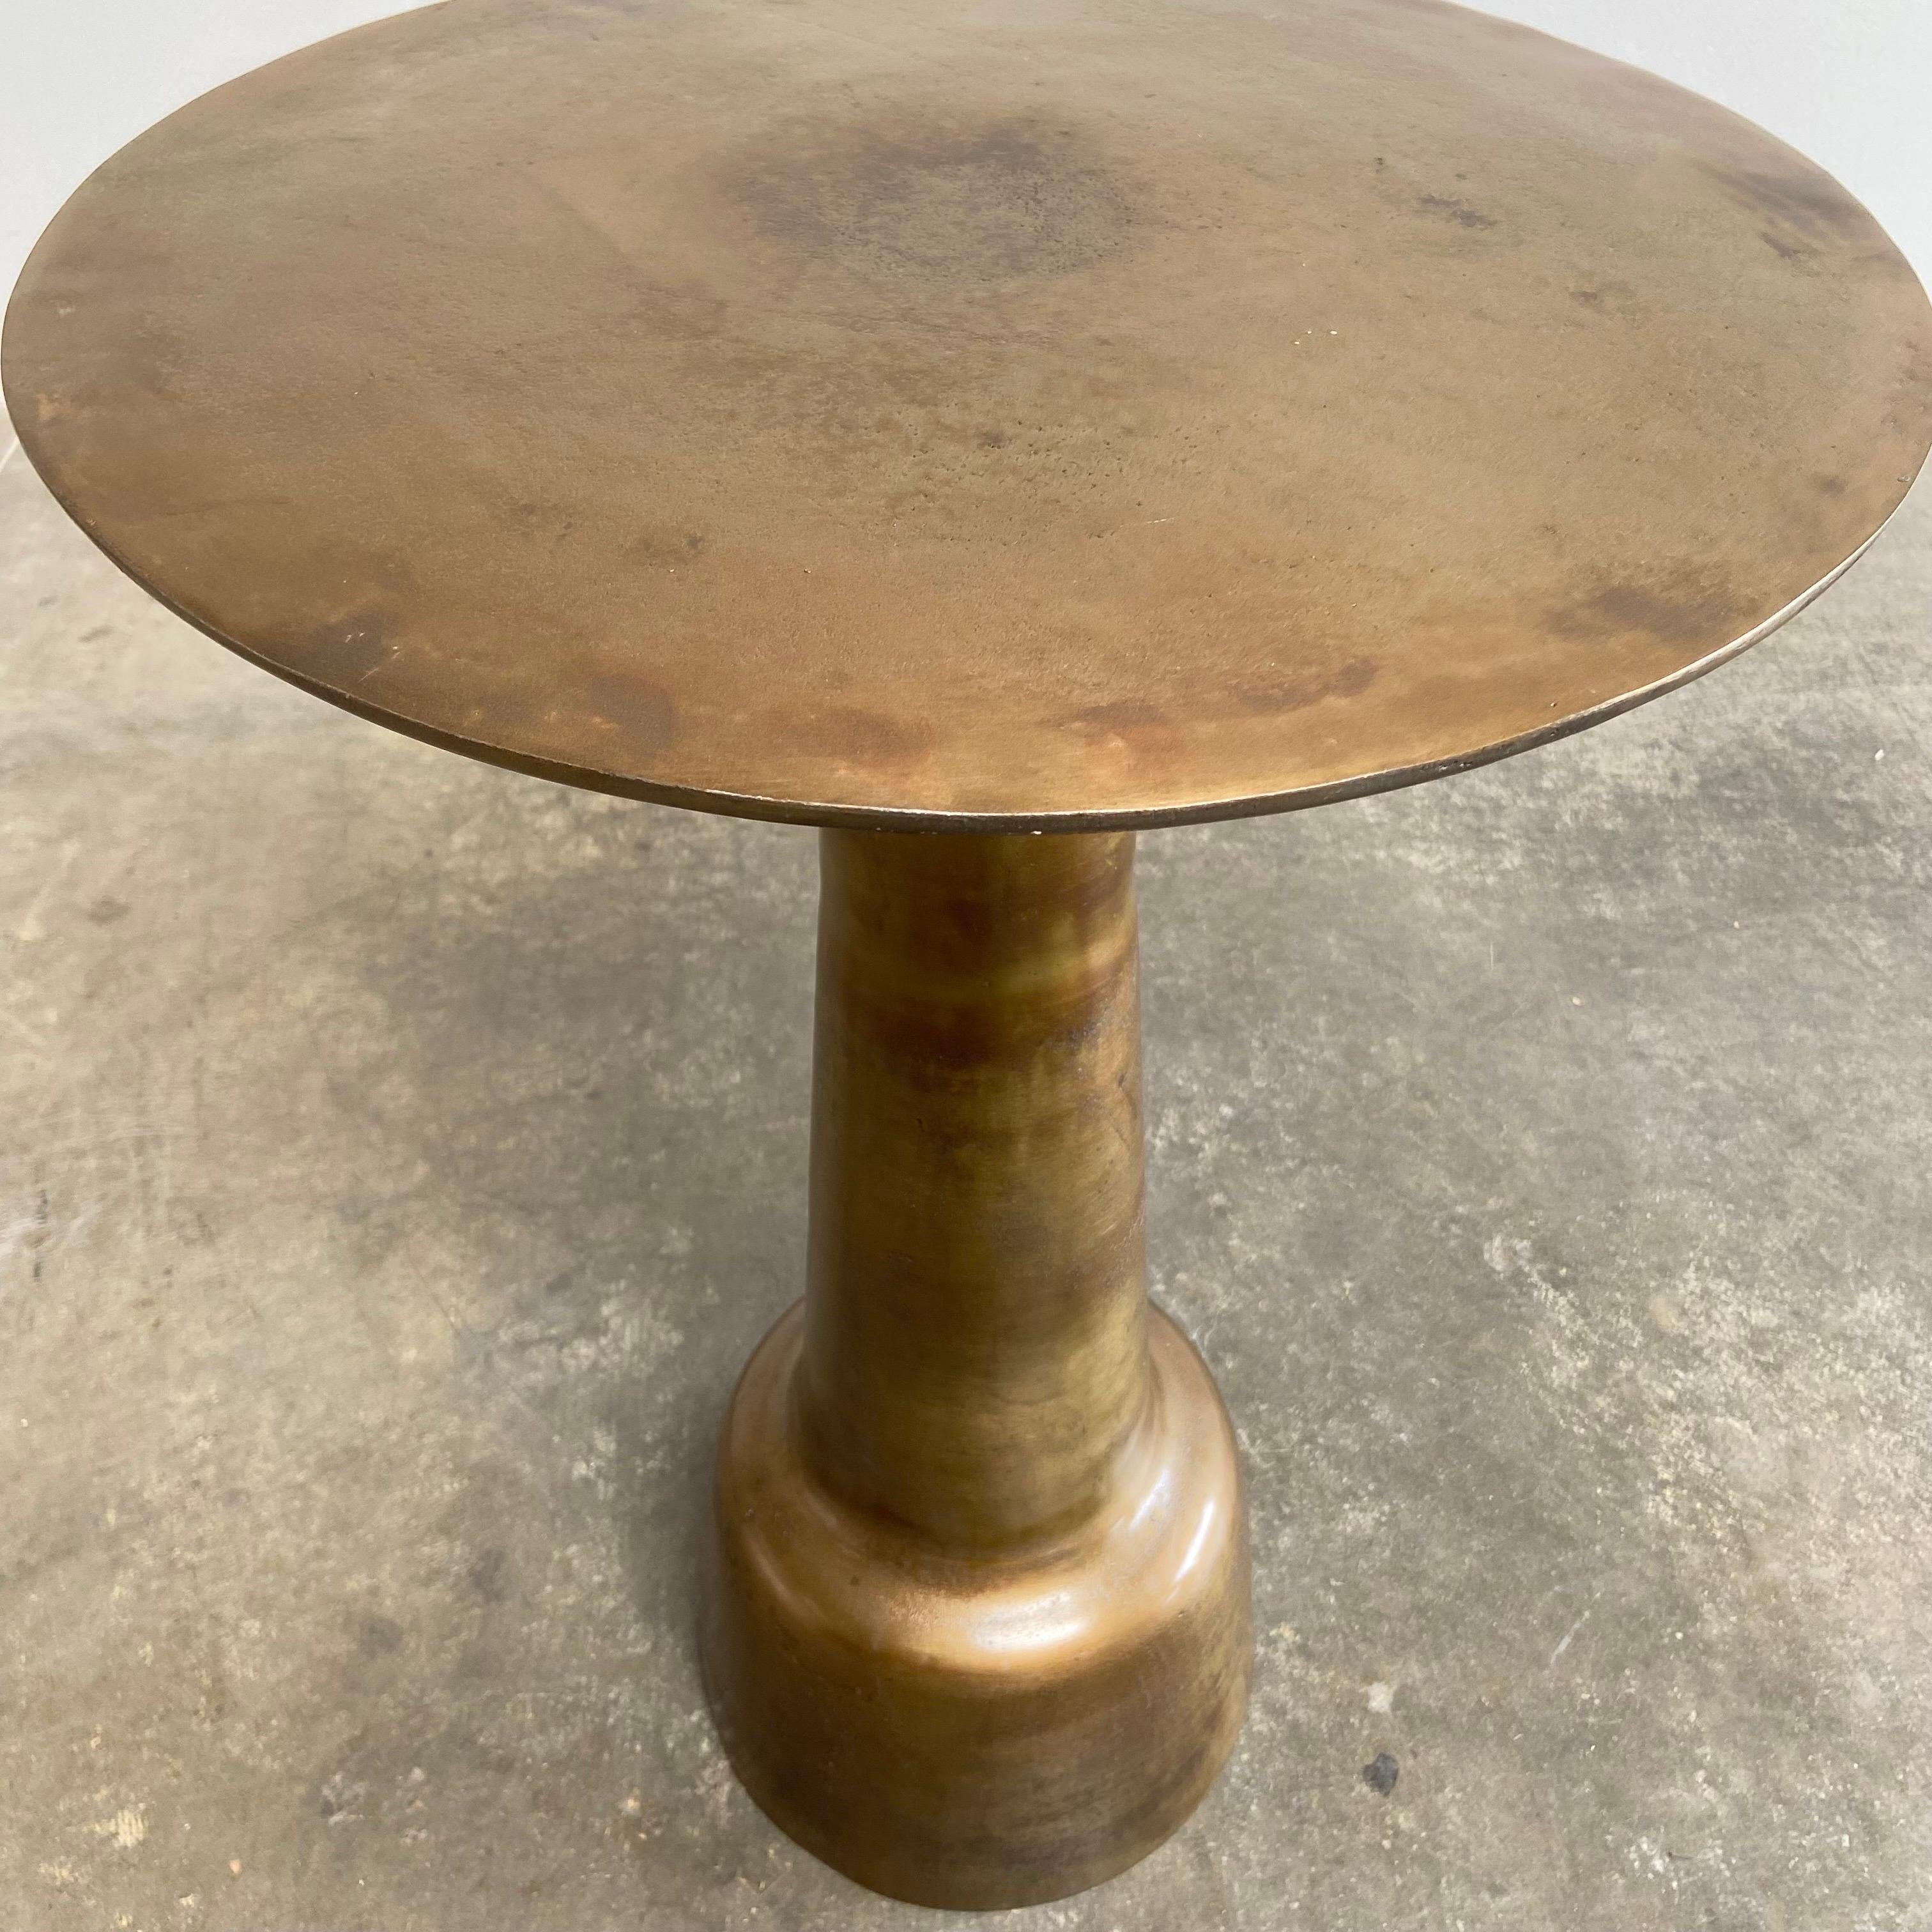 Vintage Modern Style Metal Side Table in Distressed Antique Brass Finish 6